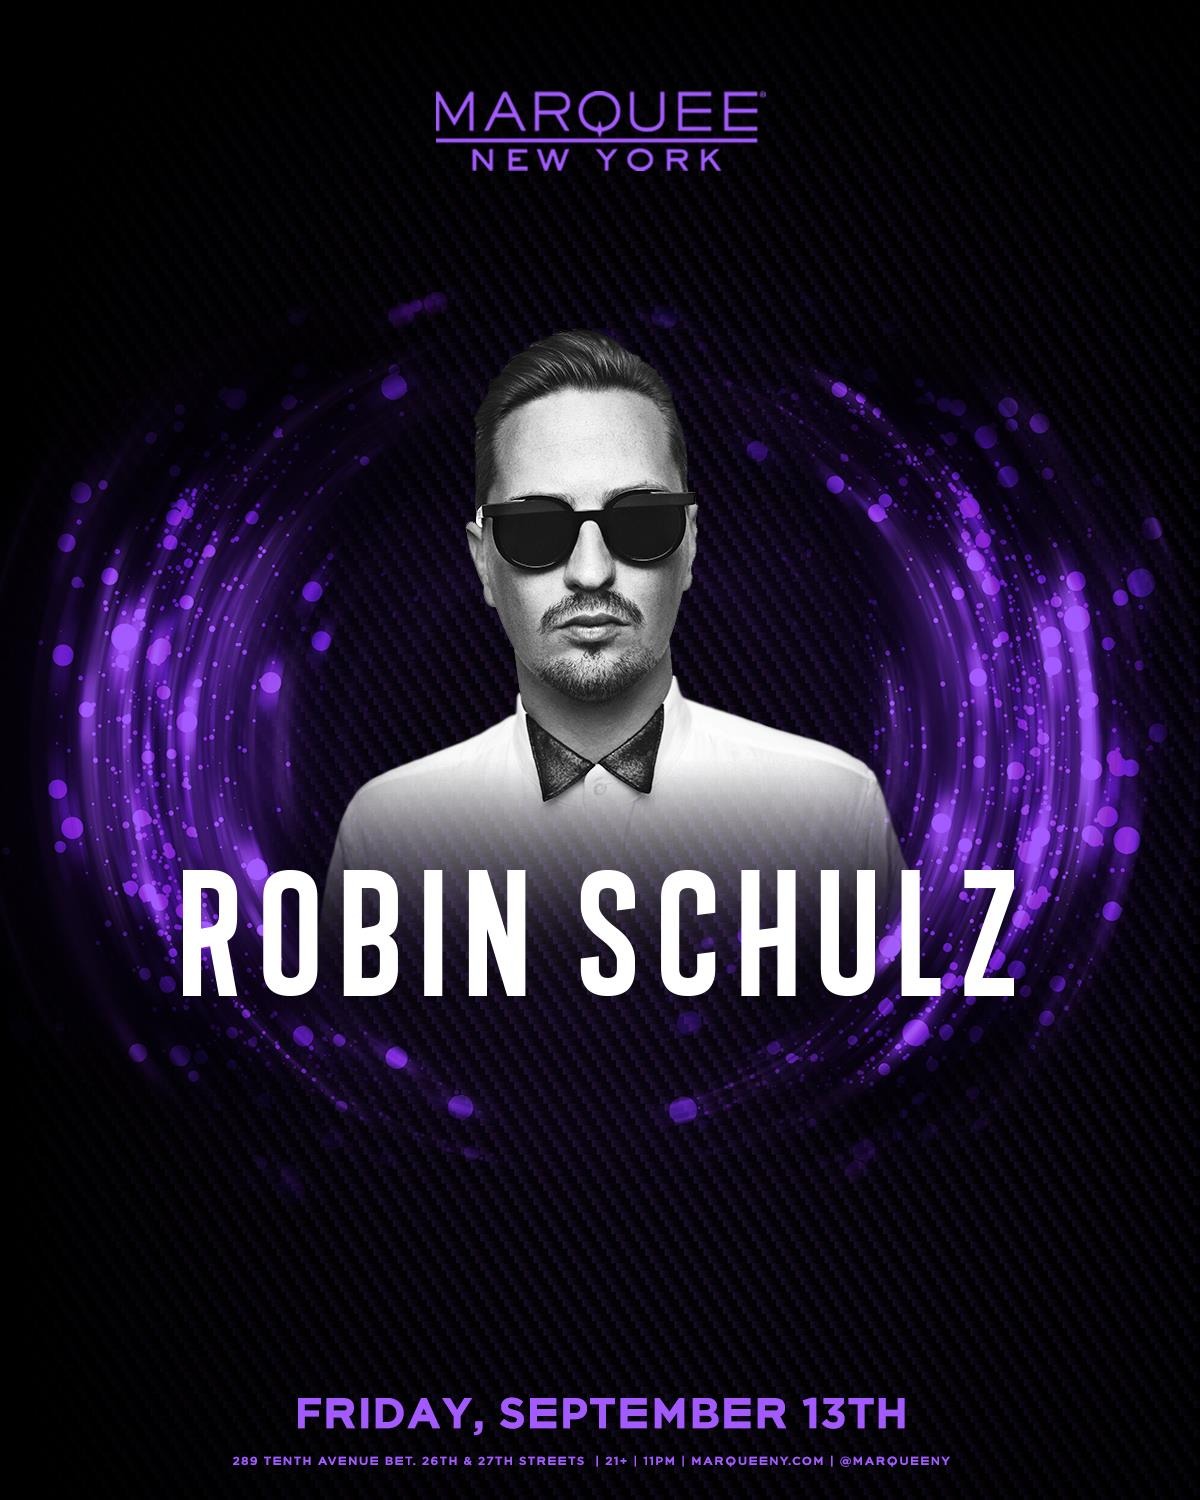 robin schulz warner music (15 images) by Mike Meyer Photography